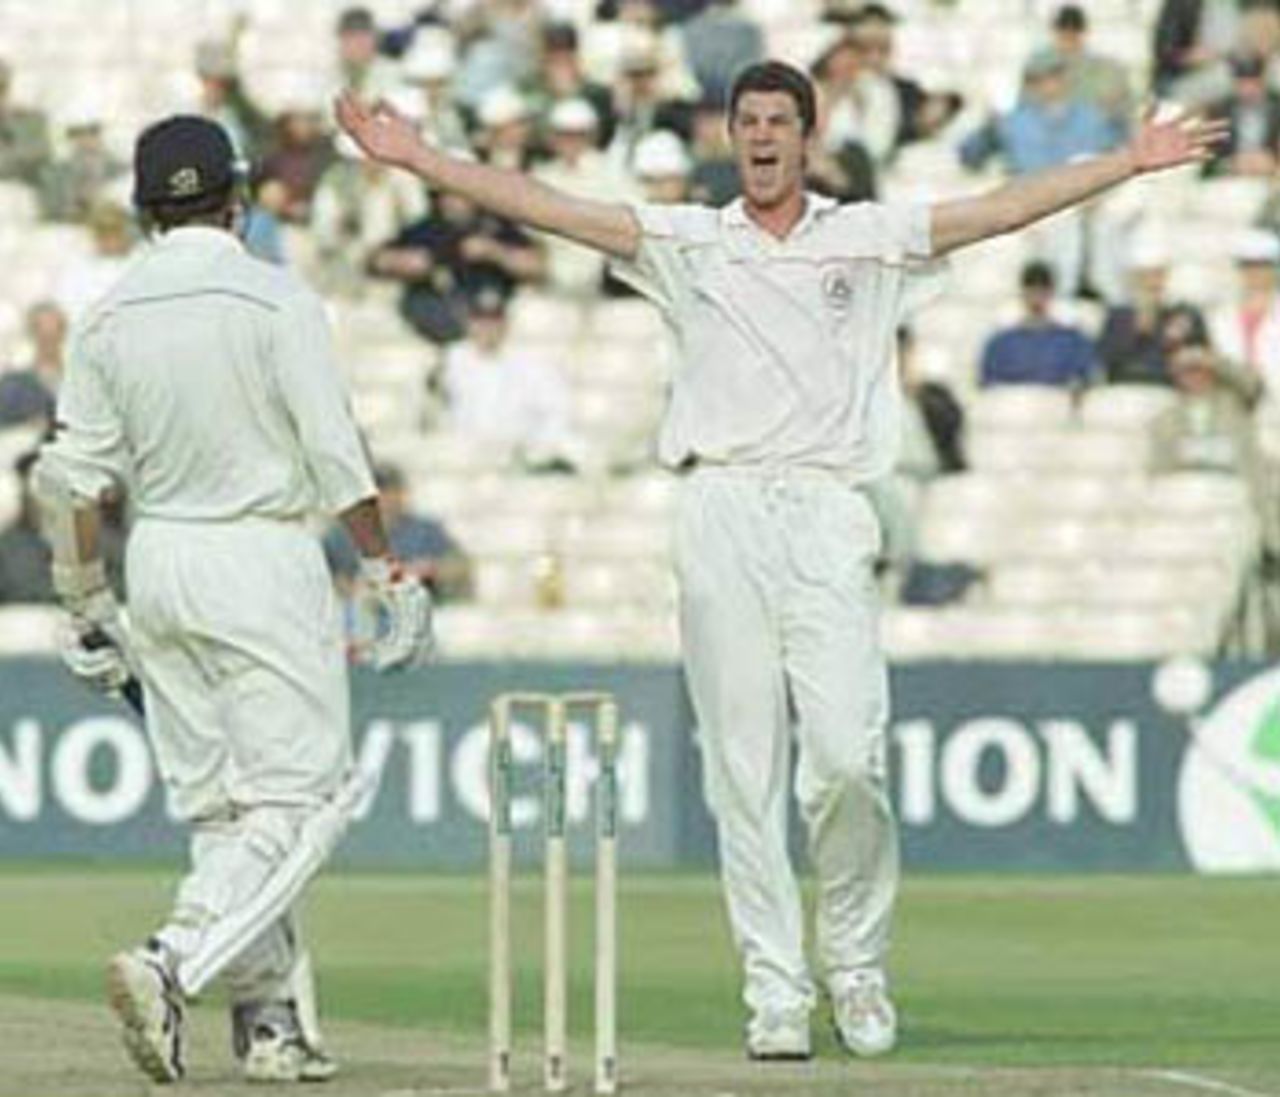 Mike Smethurst traps Rahul Dravid LBW, PPP healthcare County Championship Division One, 2000, Lancashire v Kent, Old Trafford, Manchester, 17-20 August 2000(Day 1).